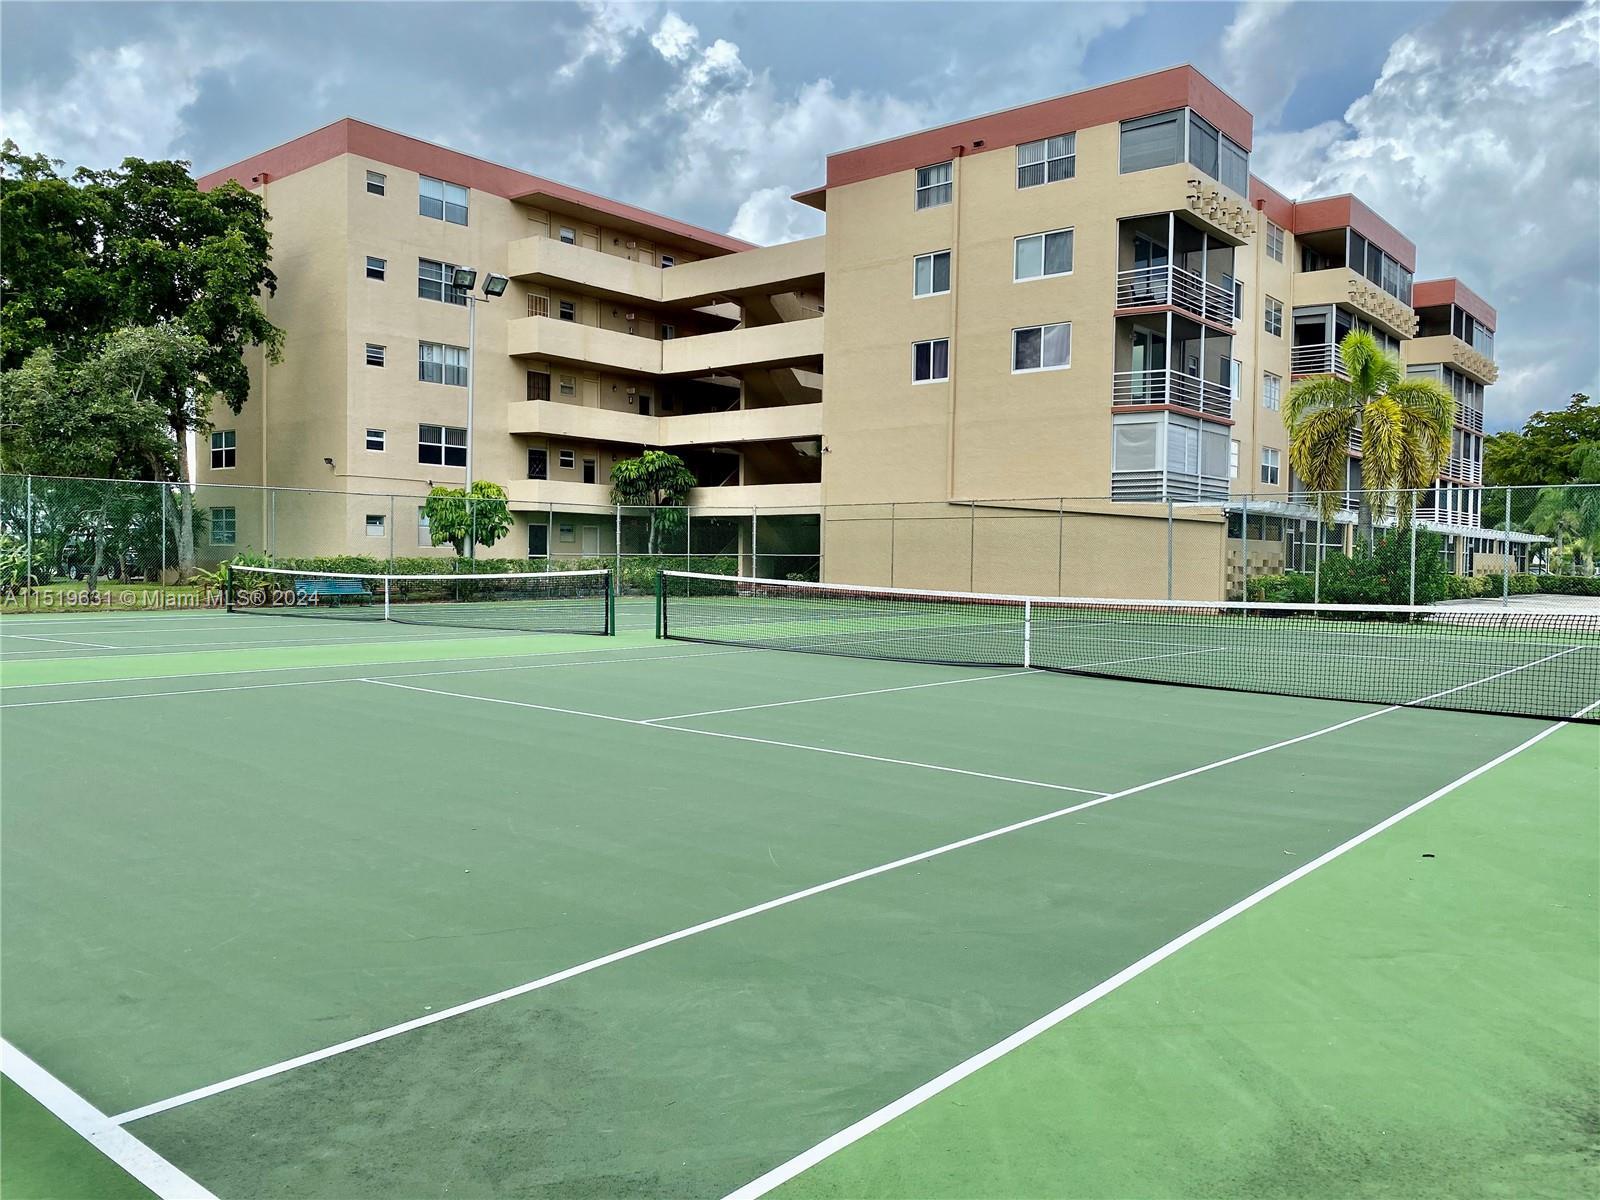 Photo of 404 NW 68th Ave #101 in Plantation, FL